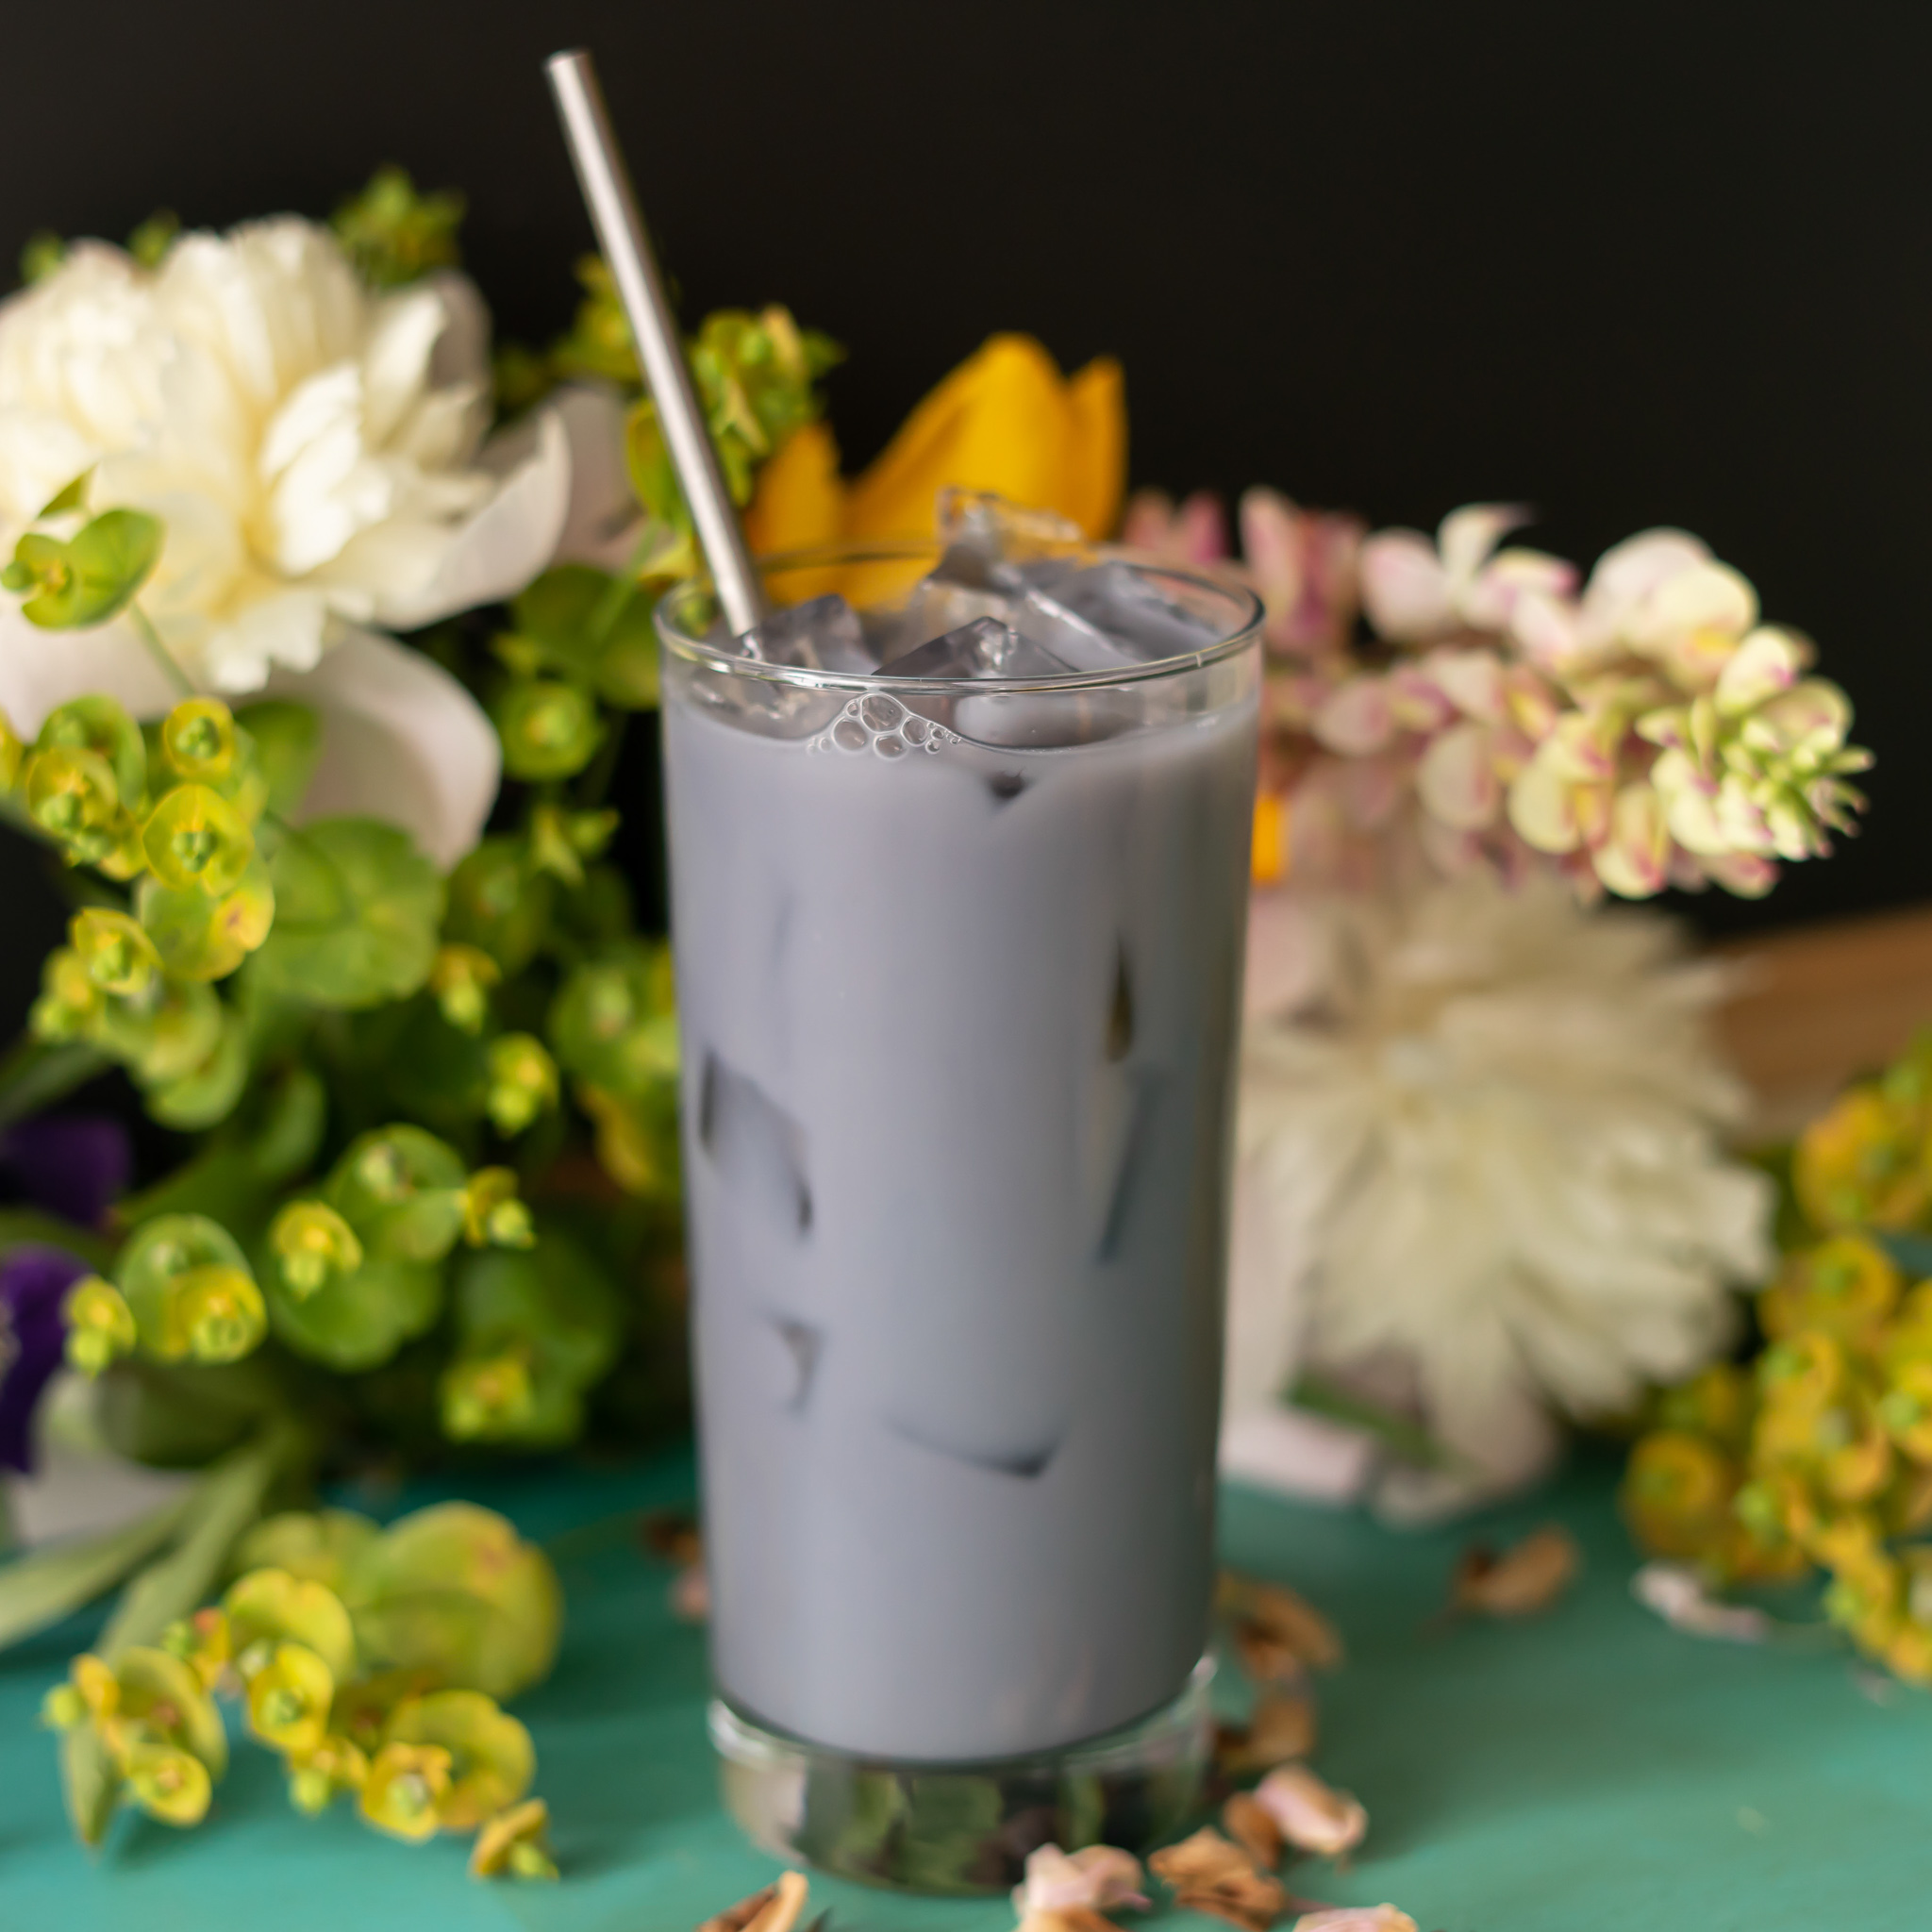 A lavender colored iced tea drink in a tall, slim glass against a floral background